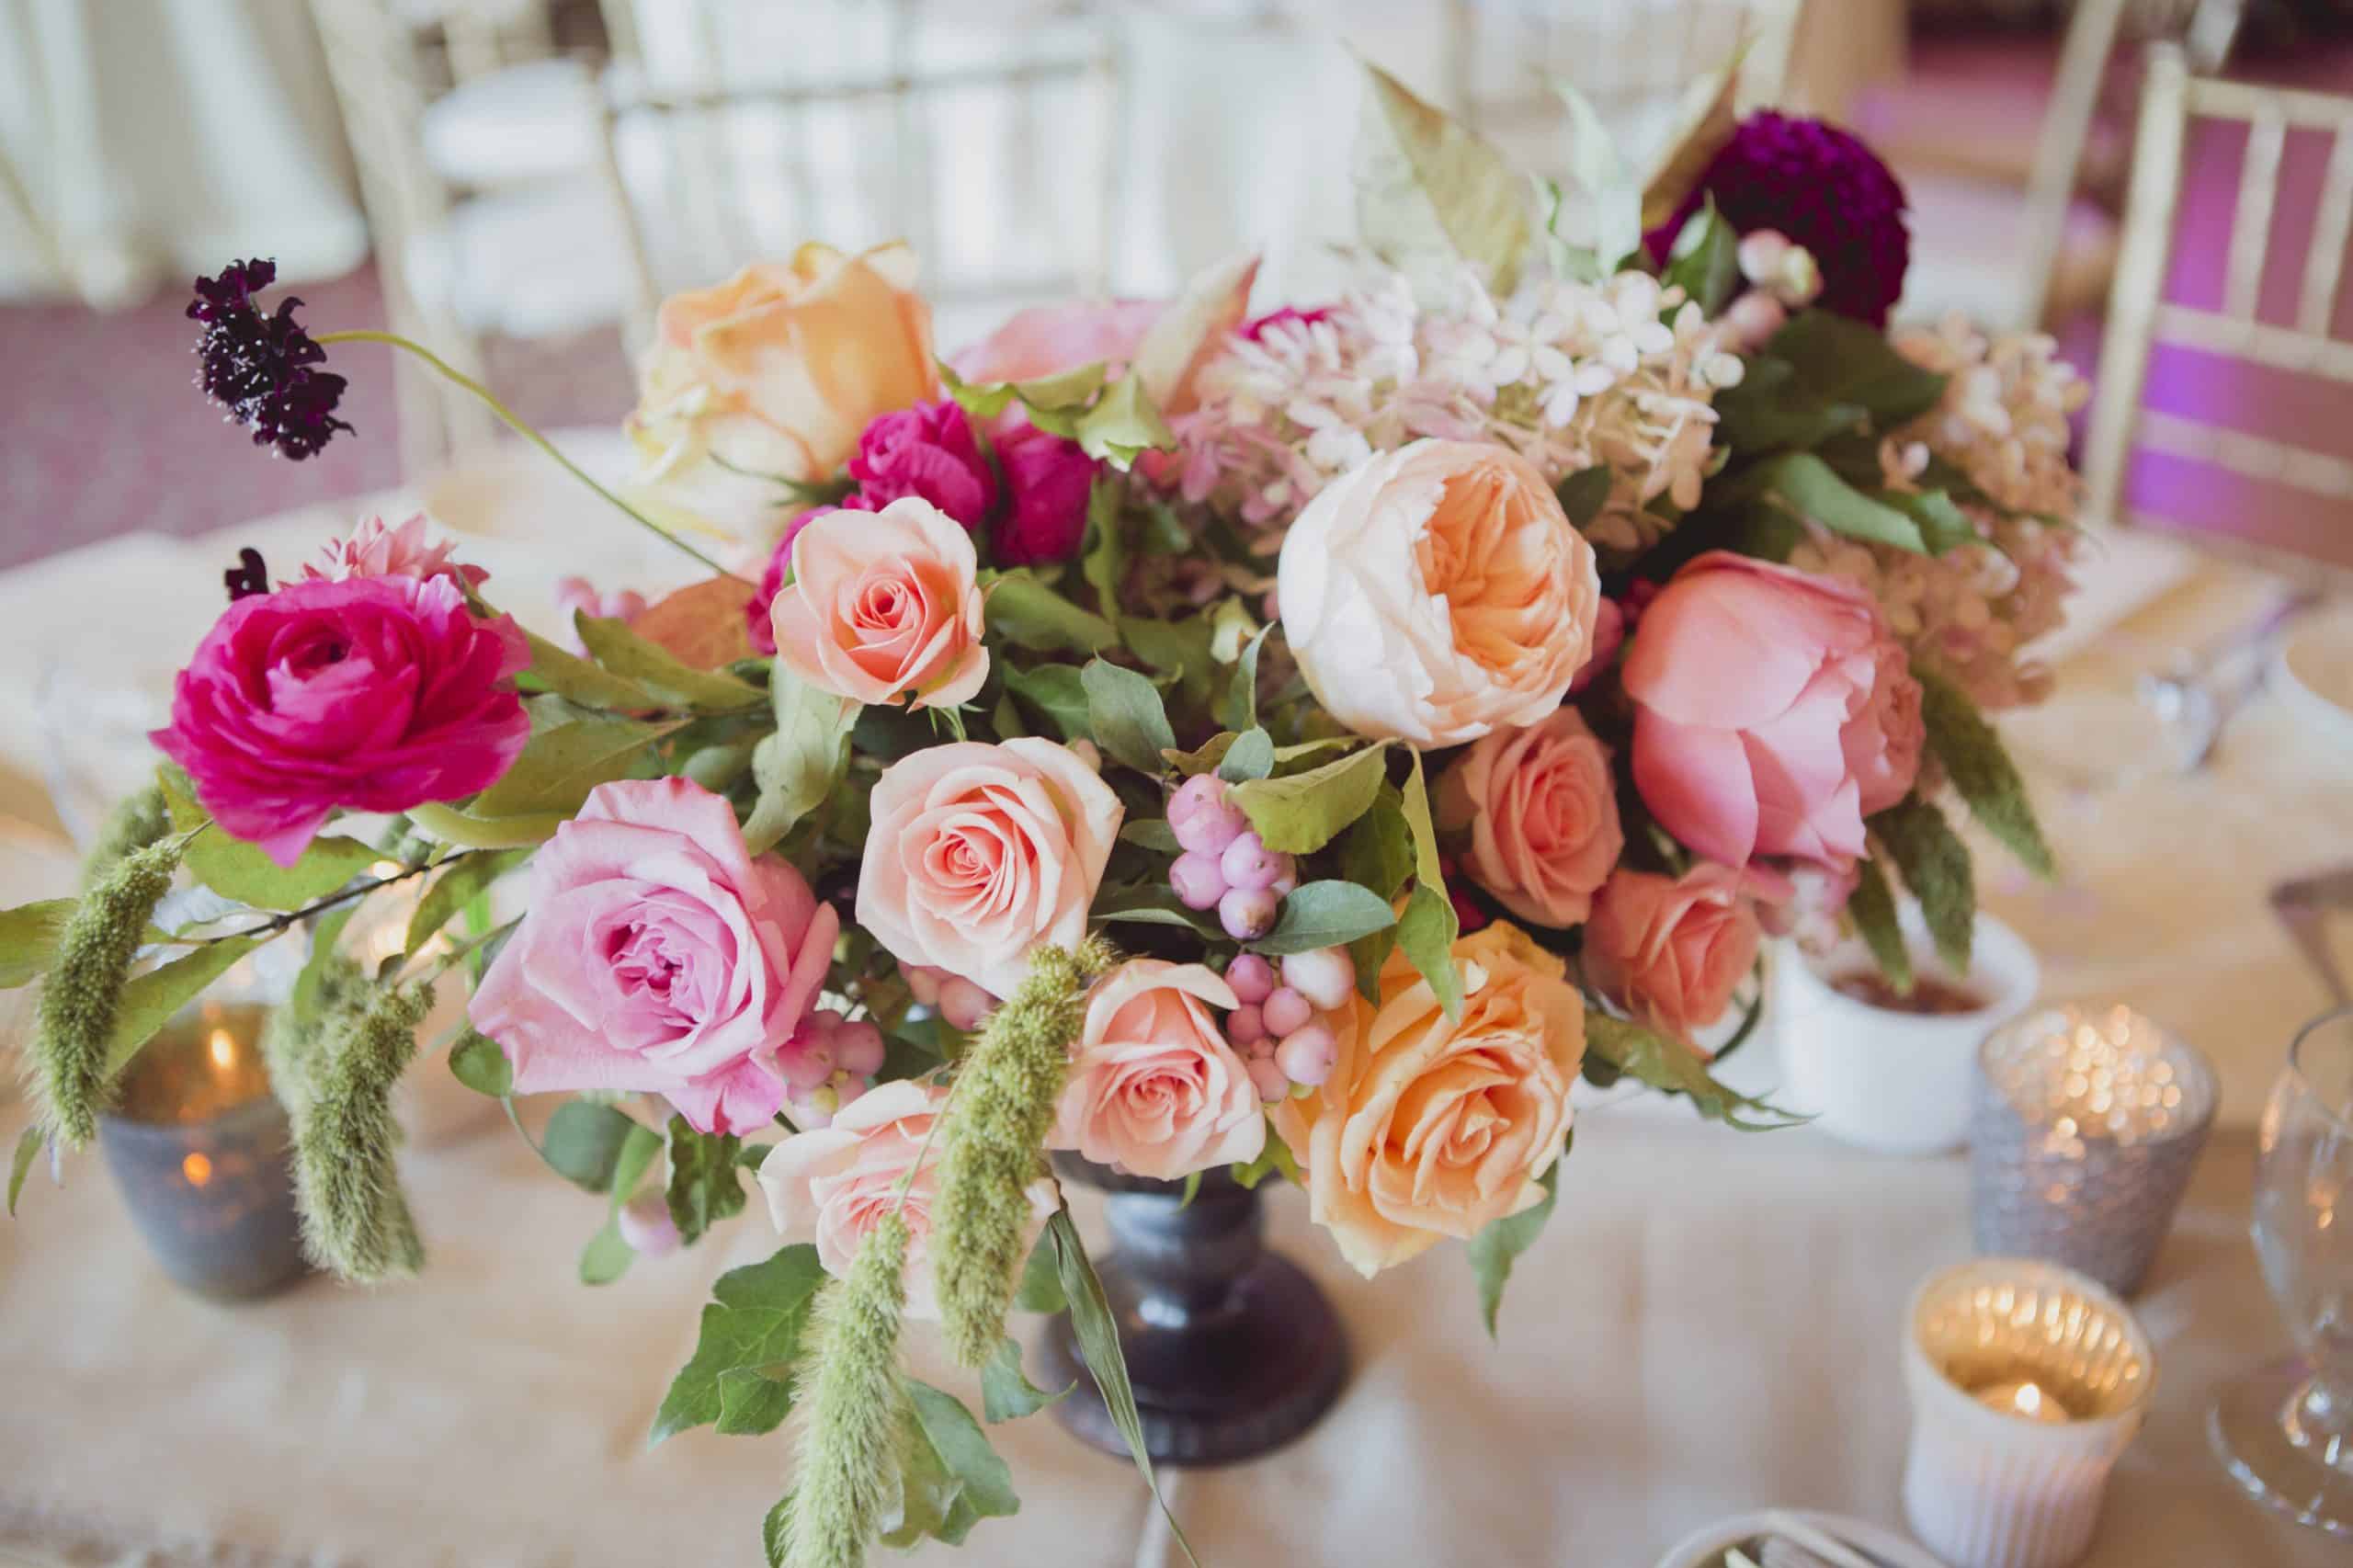 View More: http://elizabethinlove.pass.us/laura-and-belal